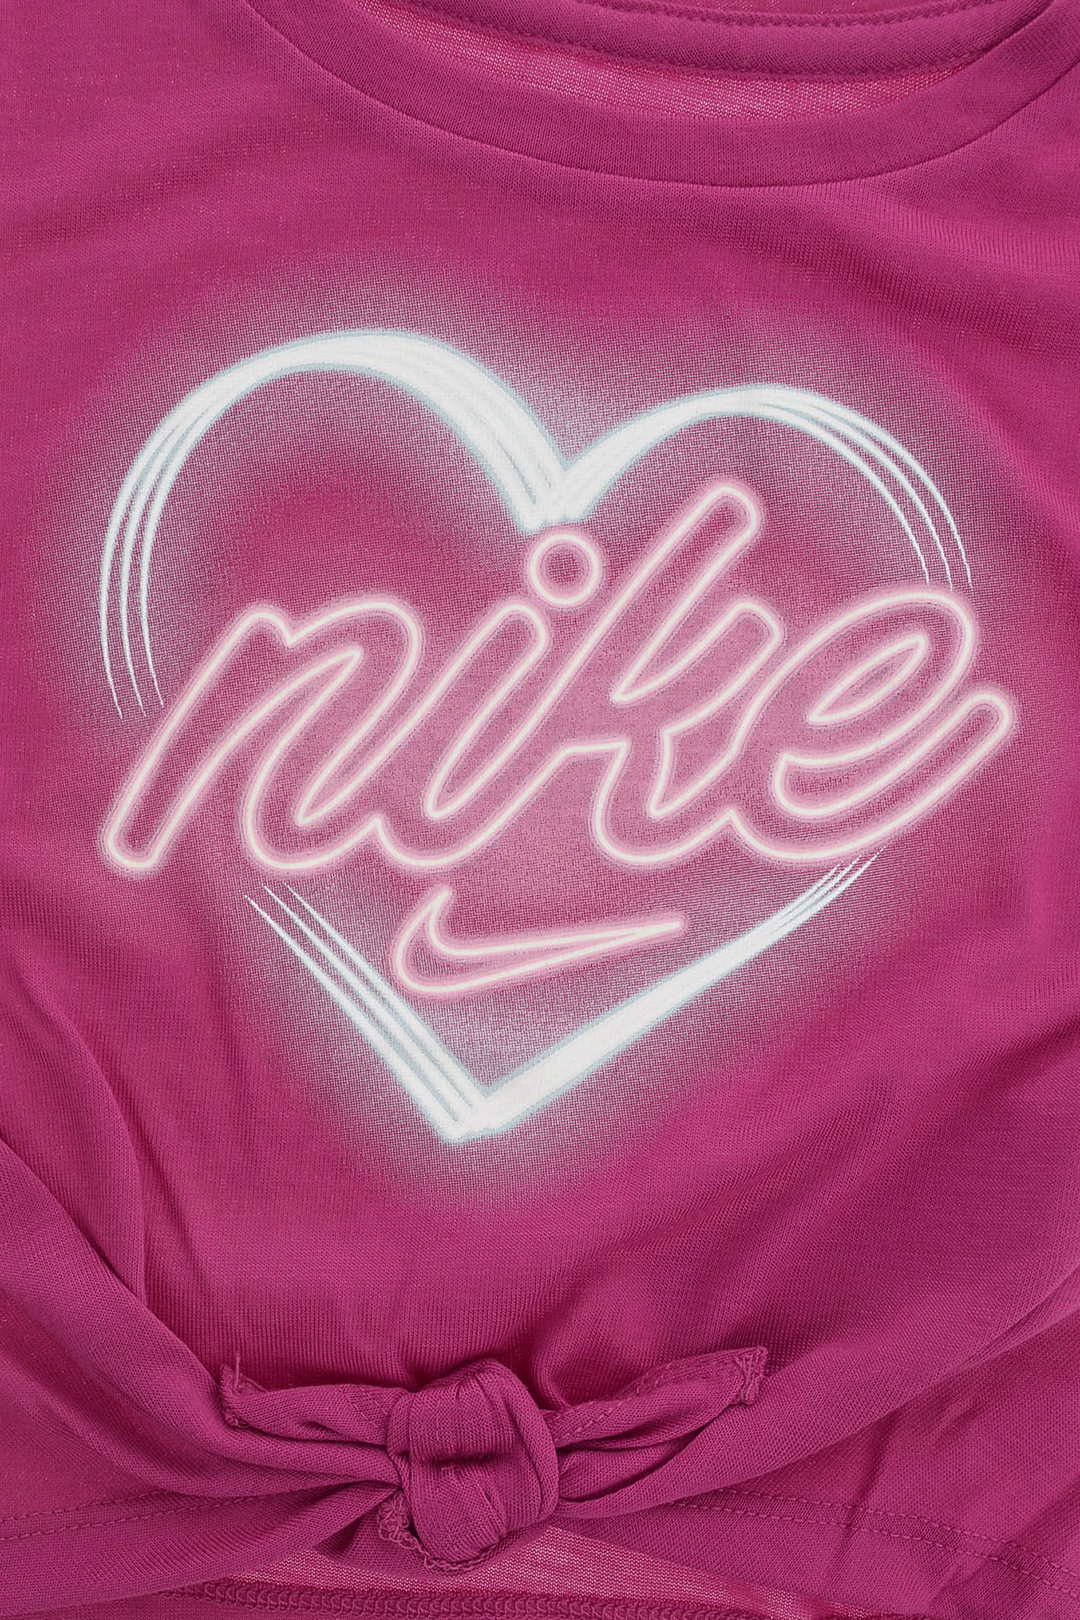 New! Girl's Nike Black Pink Heart Logo Tee and Leggings Outfit Size 4 